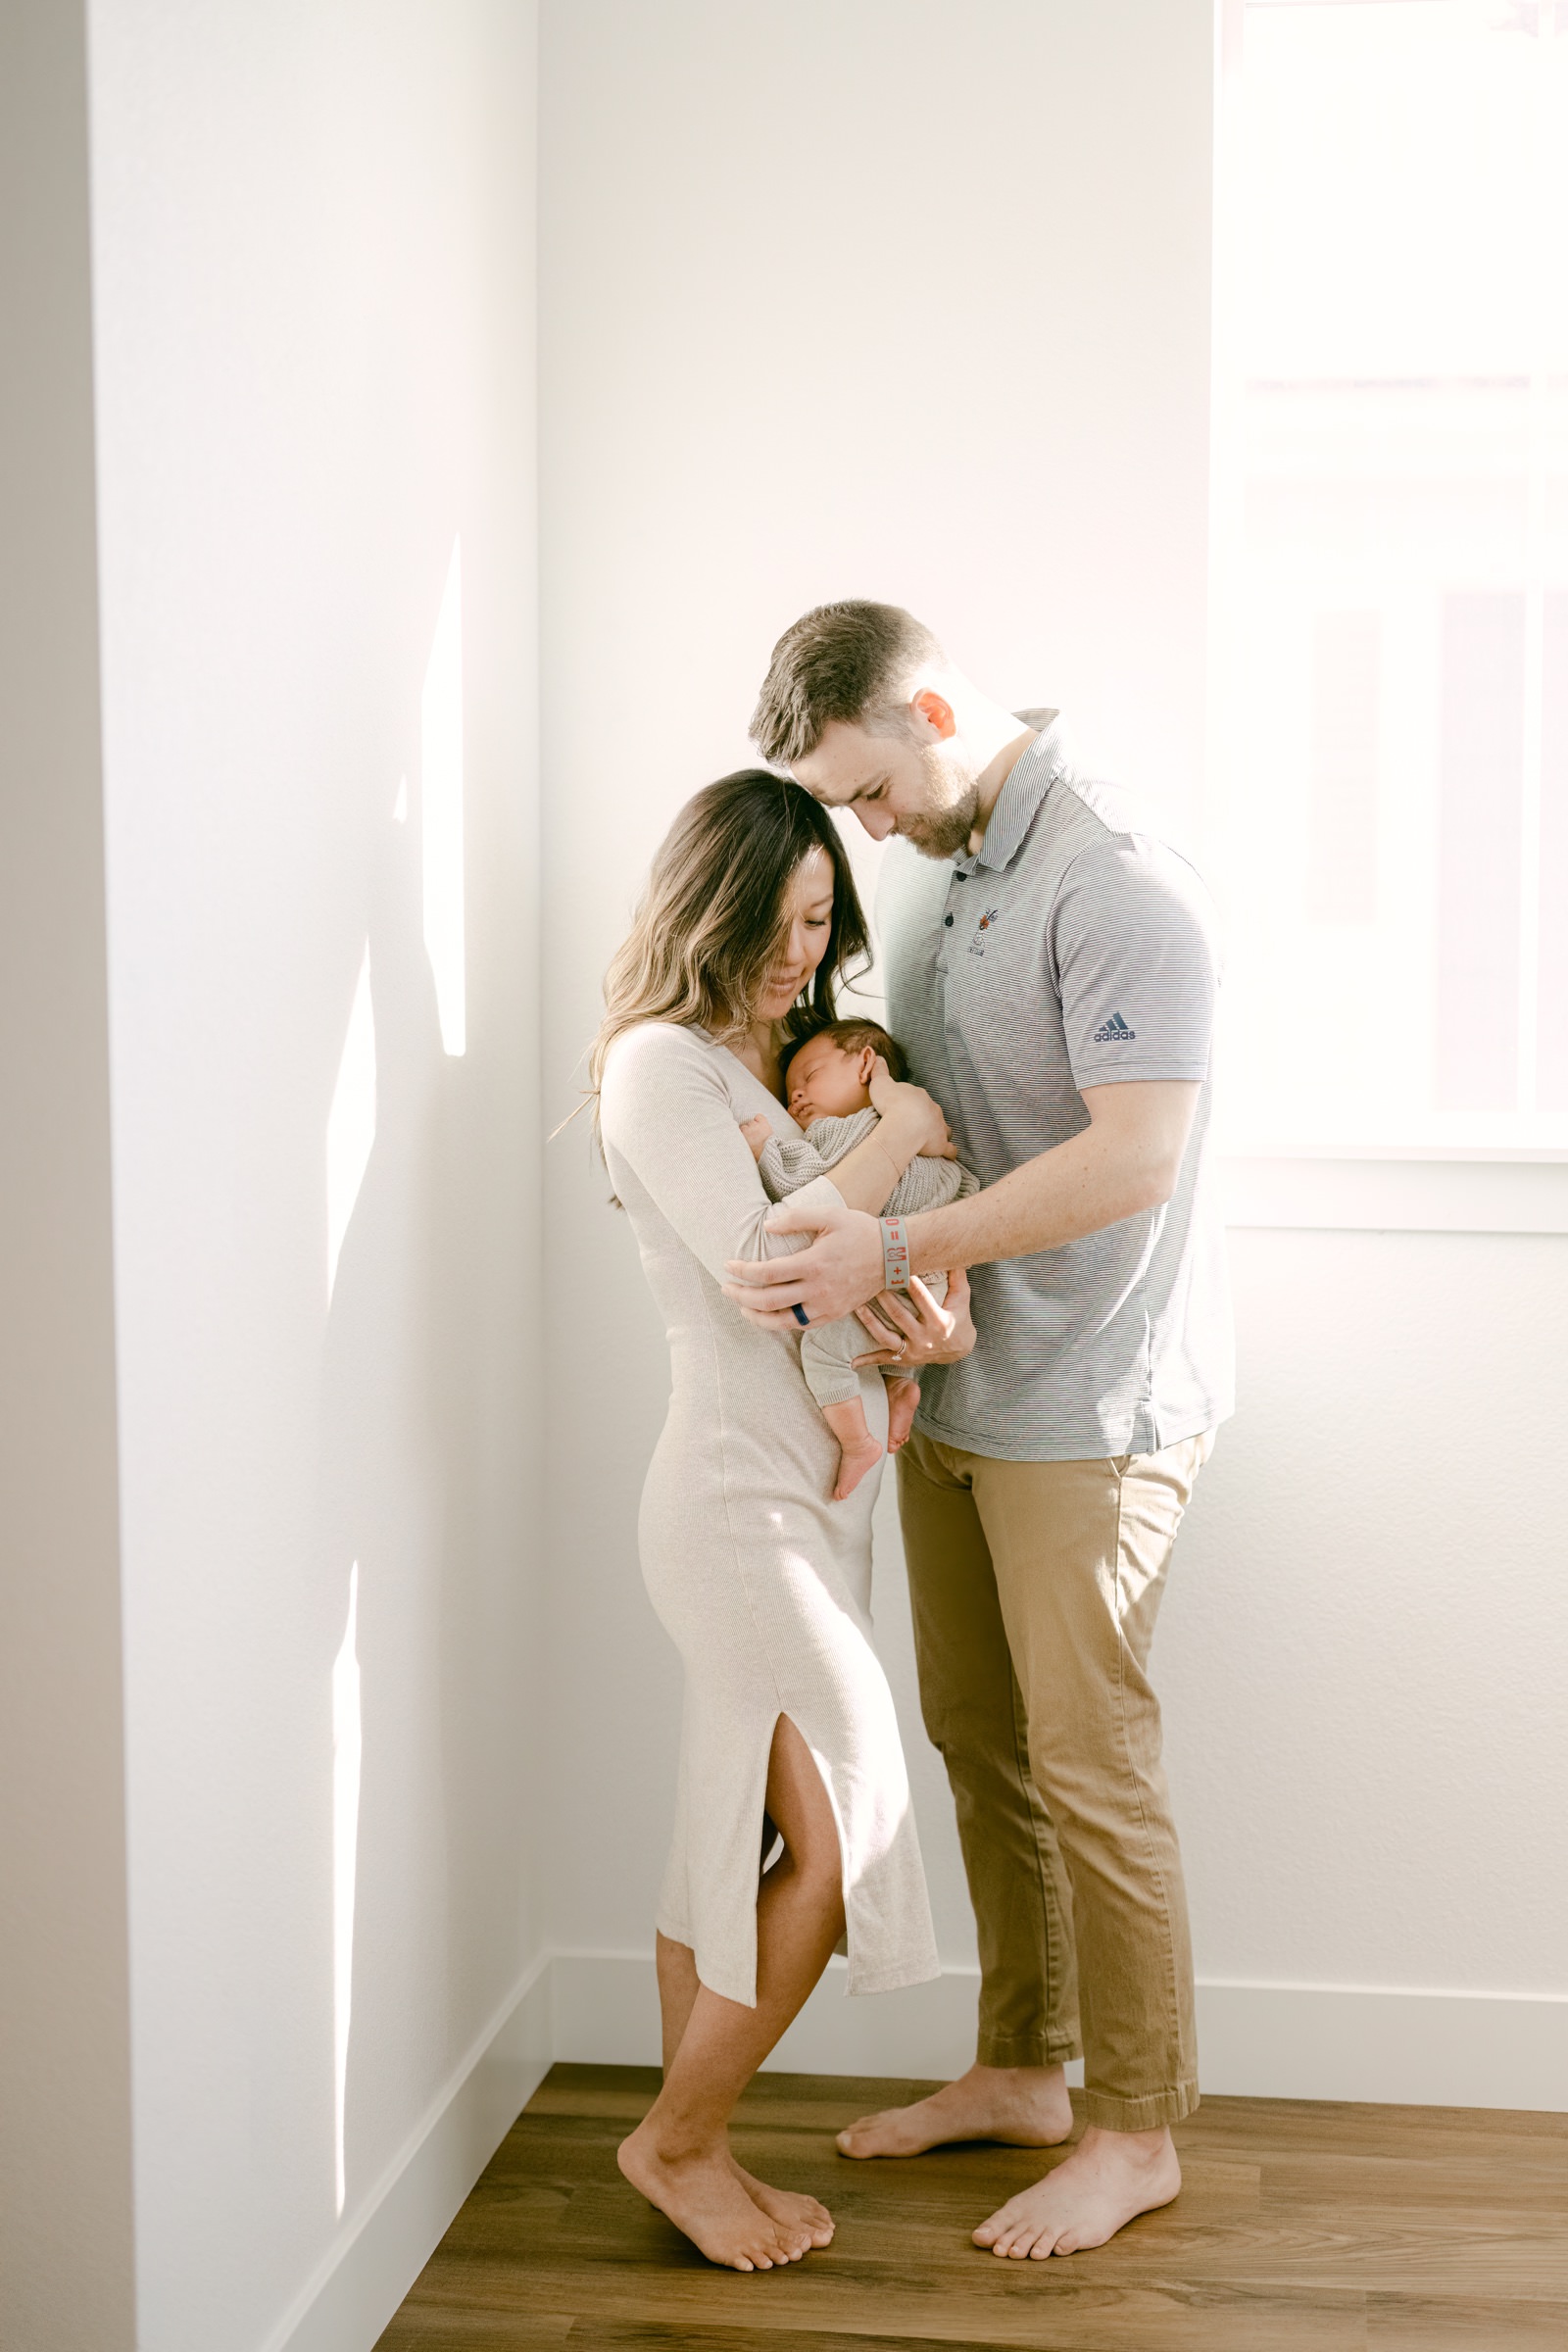 Boulder Photographer taking an artistic photo of a young family during a newborn session